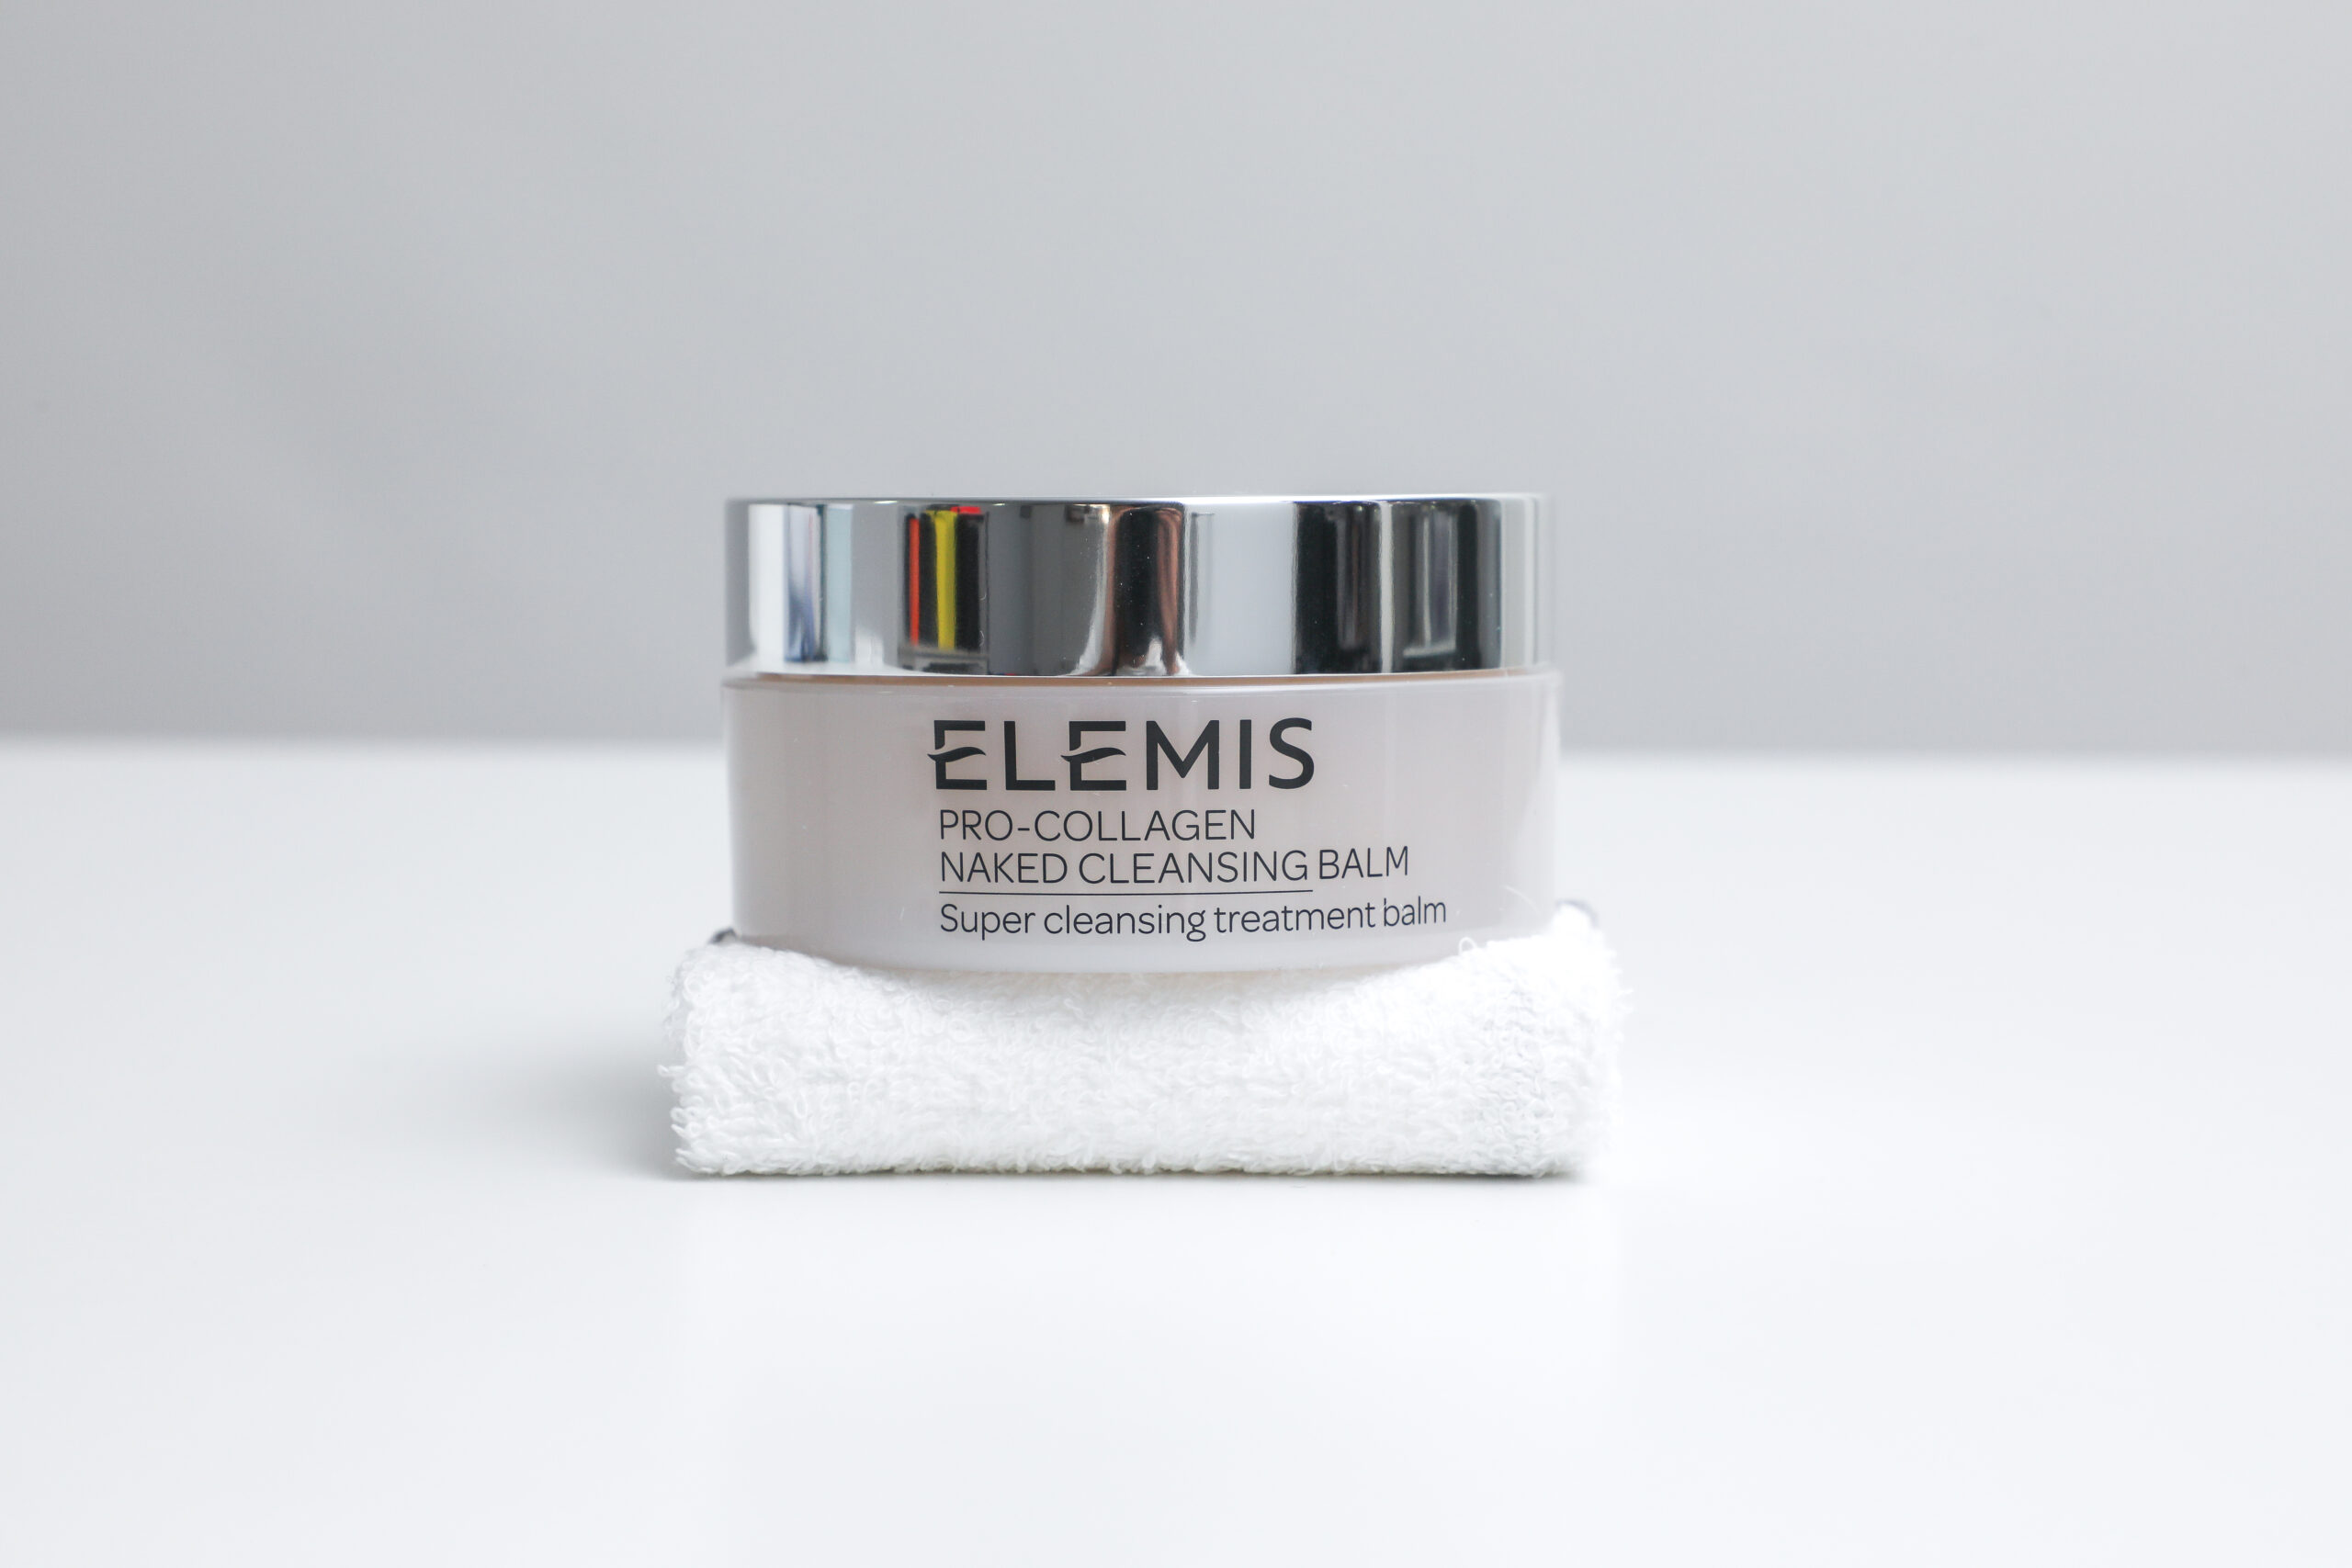 Elemis Pro Collagen Naked Cleansing Balm Skin Care